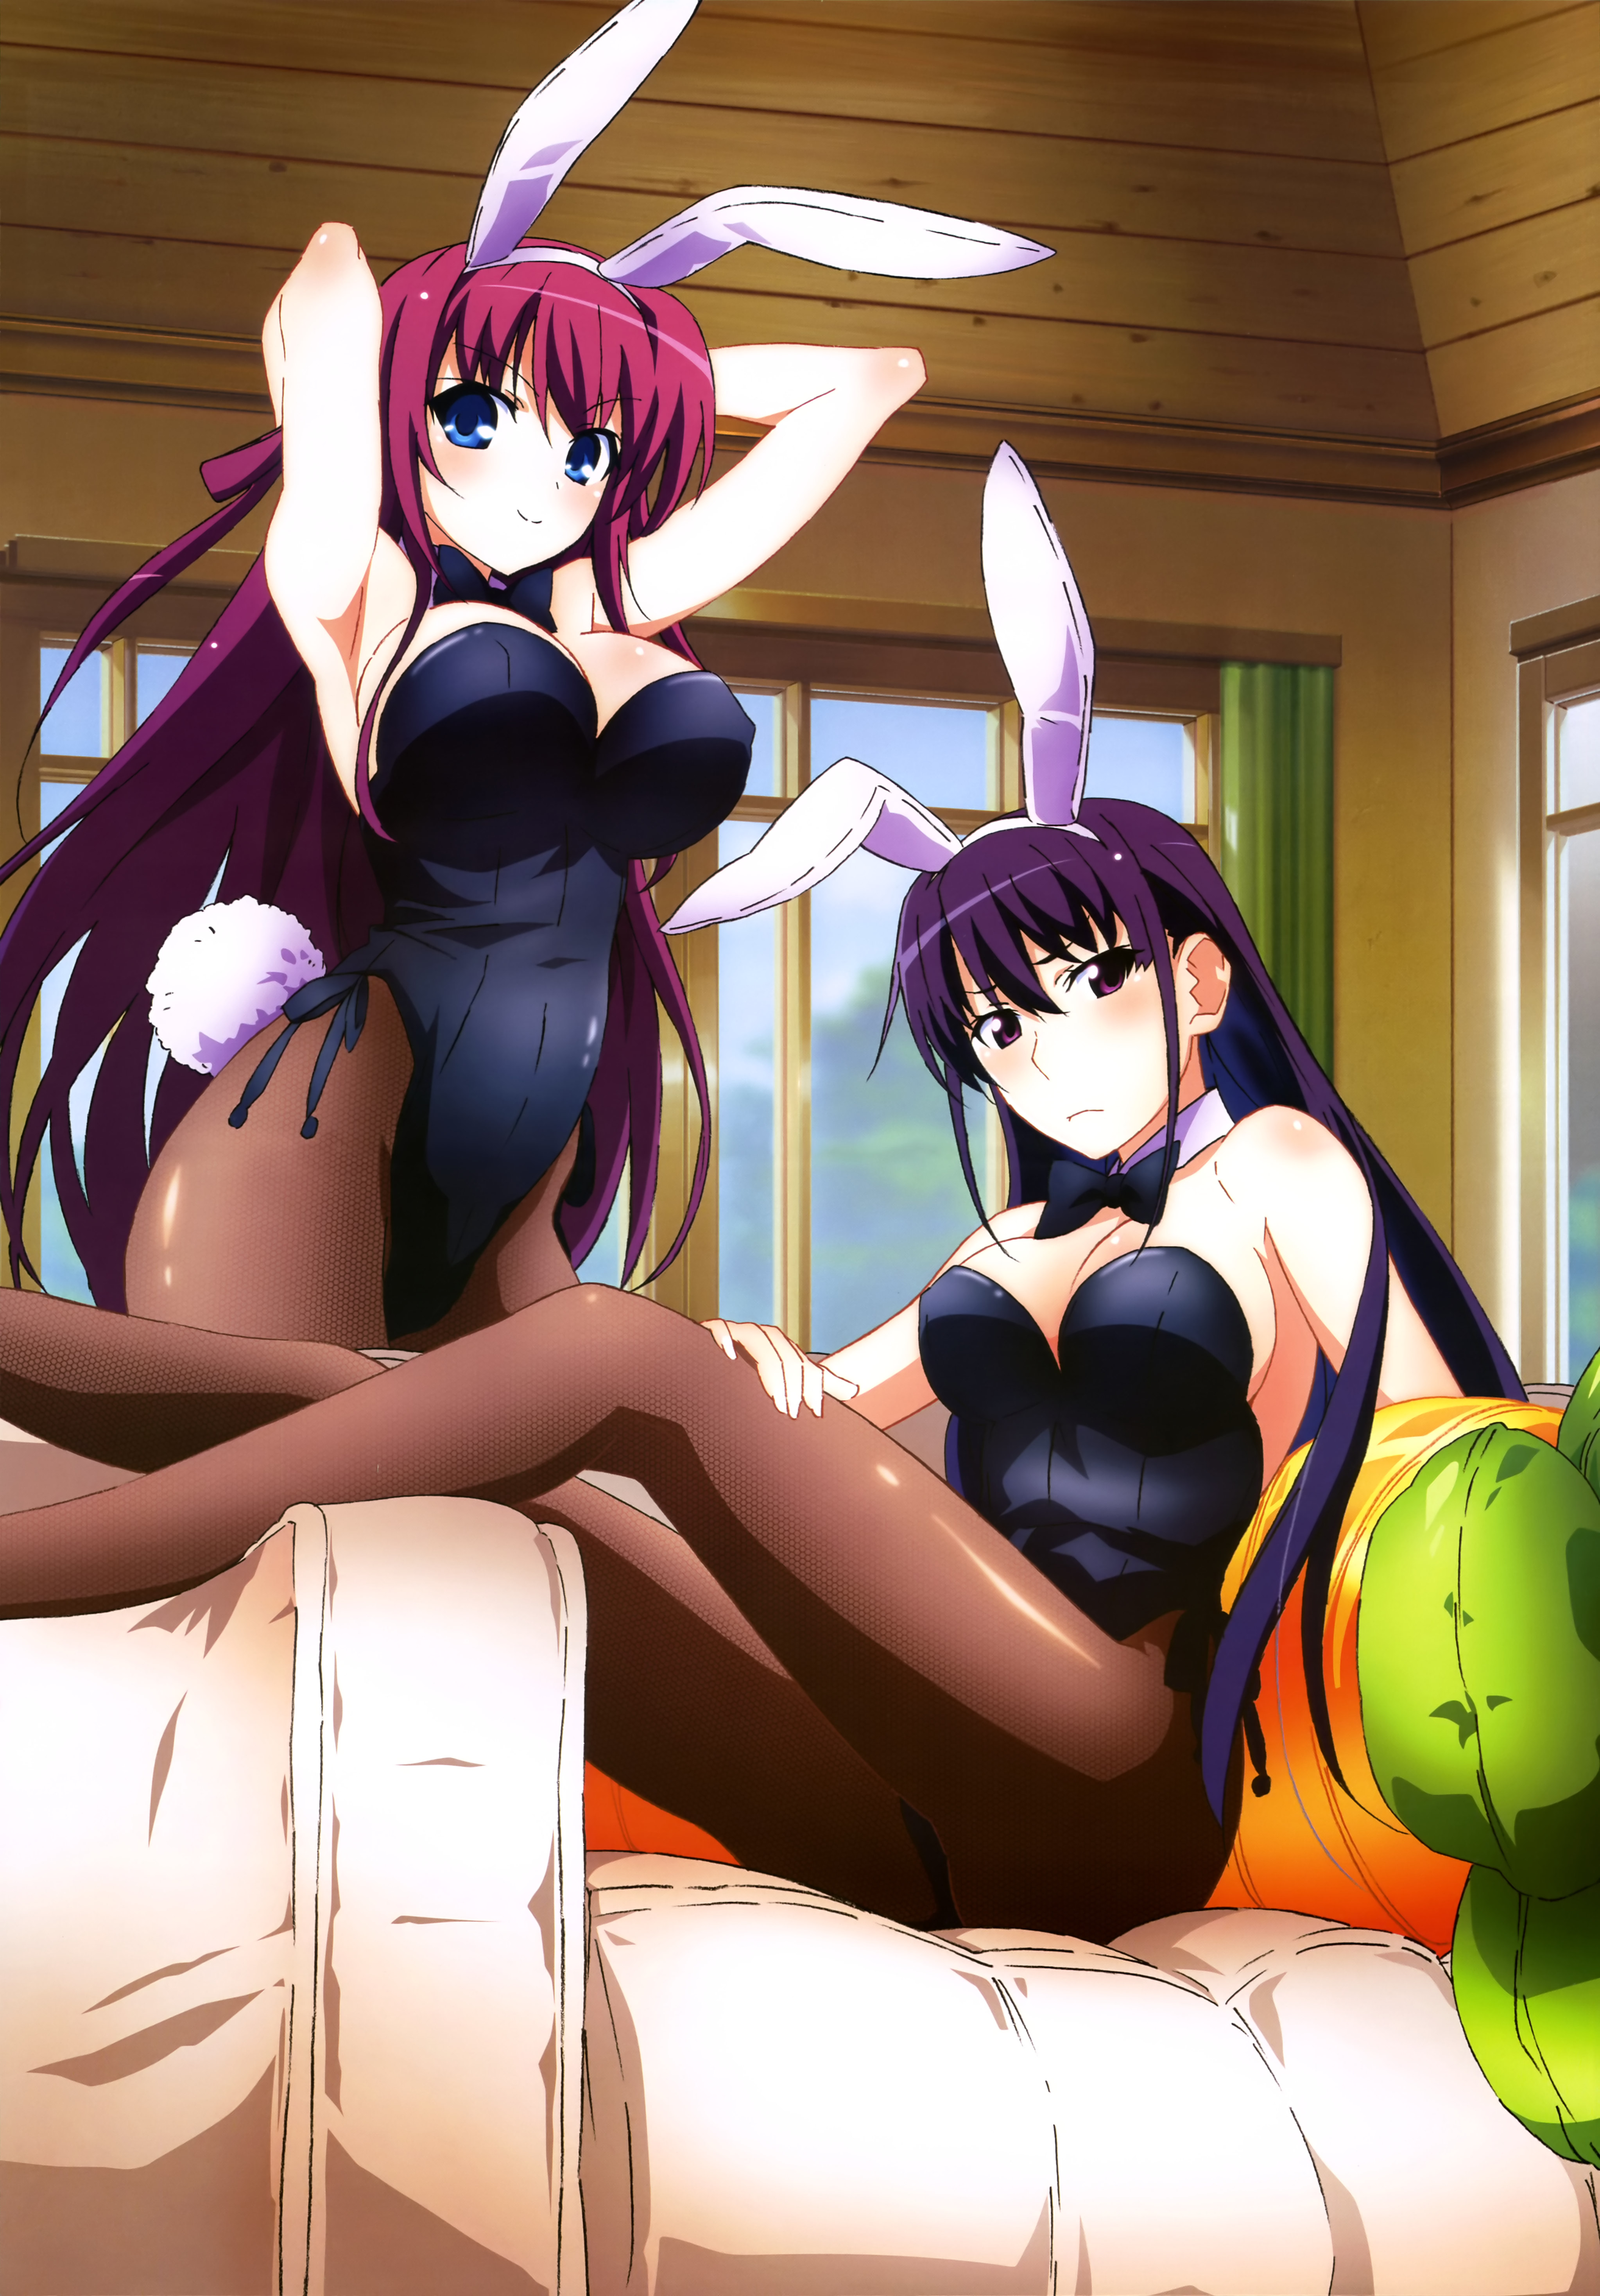 The Labyrinth of Grisaia: The Cocoon of Caprice 0 (2015)